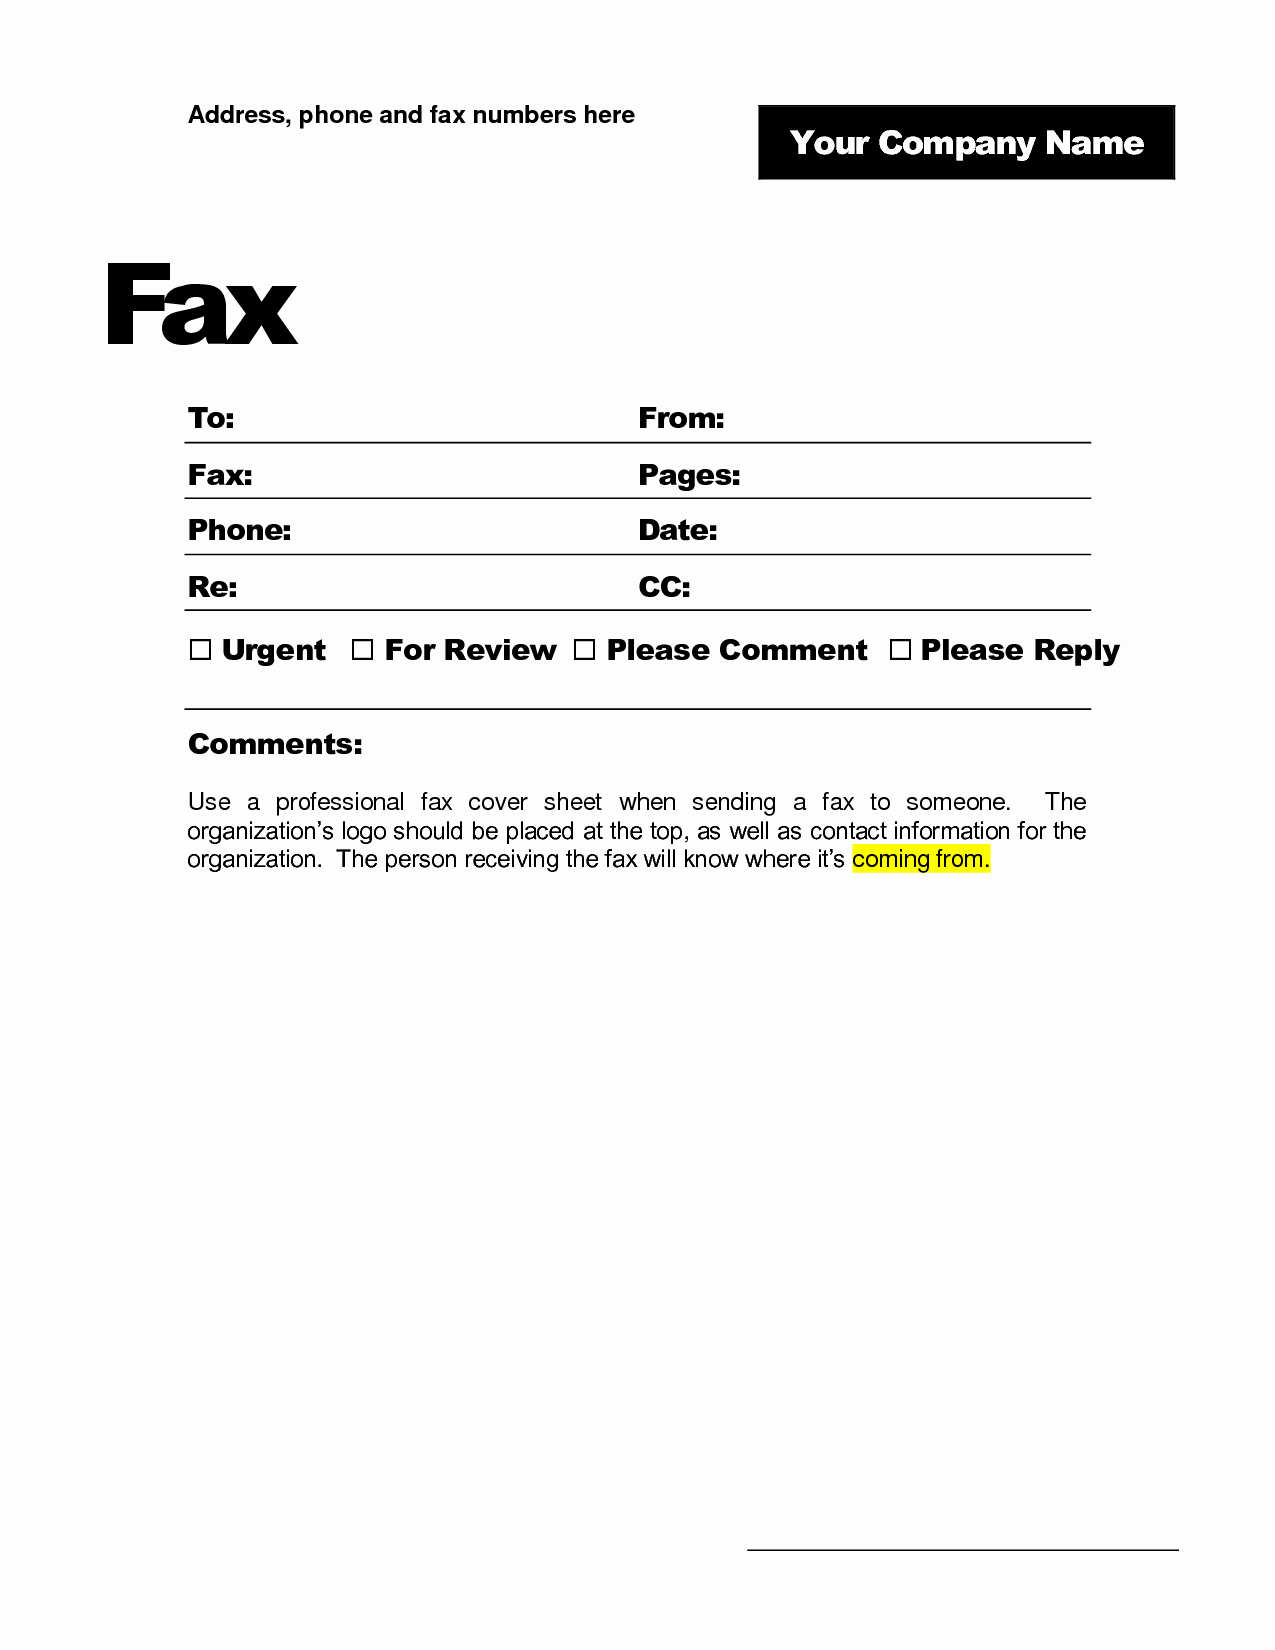 Cover Page for A Fax Fresh 9 Best Of Printable Fax Cover Sheet Printable Fax